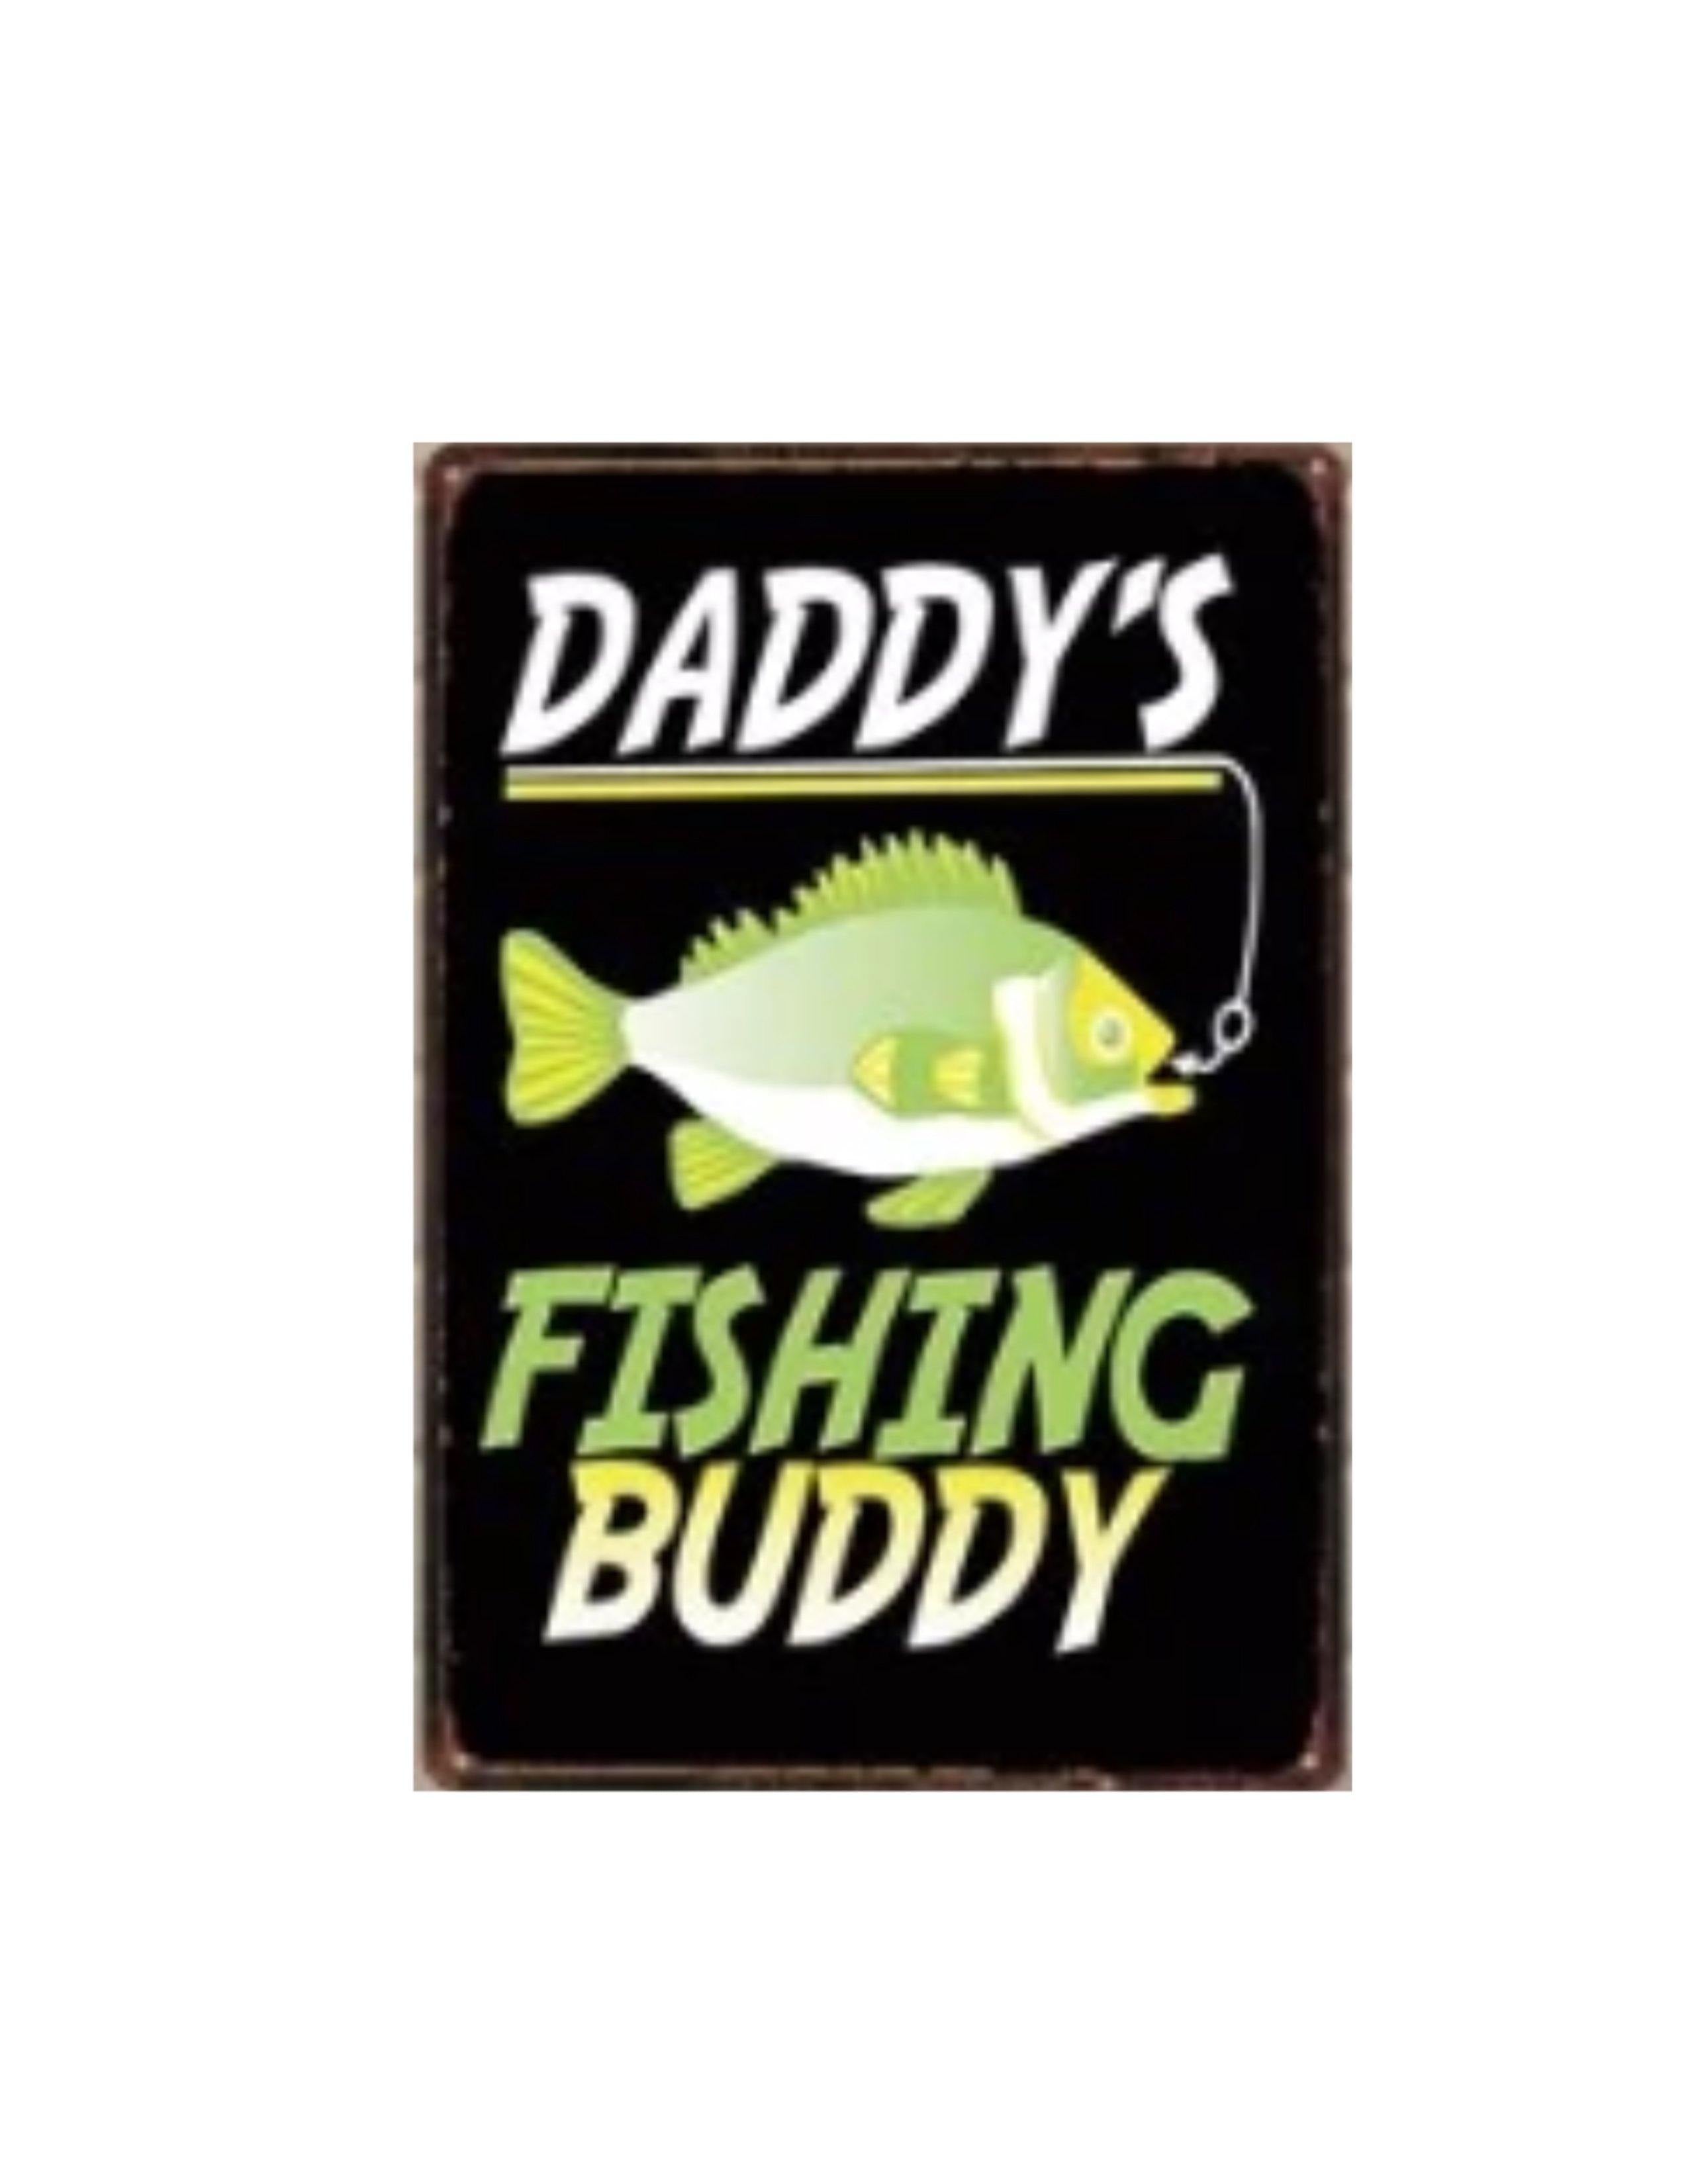 Metal Tin Sign - Daddy's Fishing Buddy - Leapfrog Outdoor Sports and Apparel